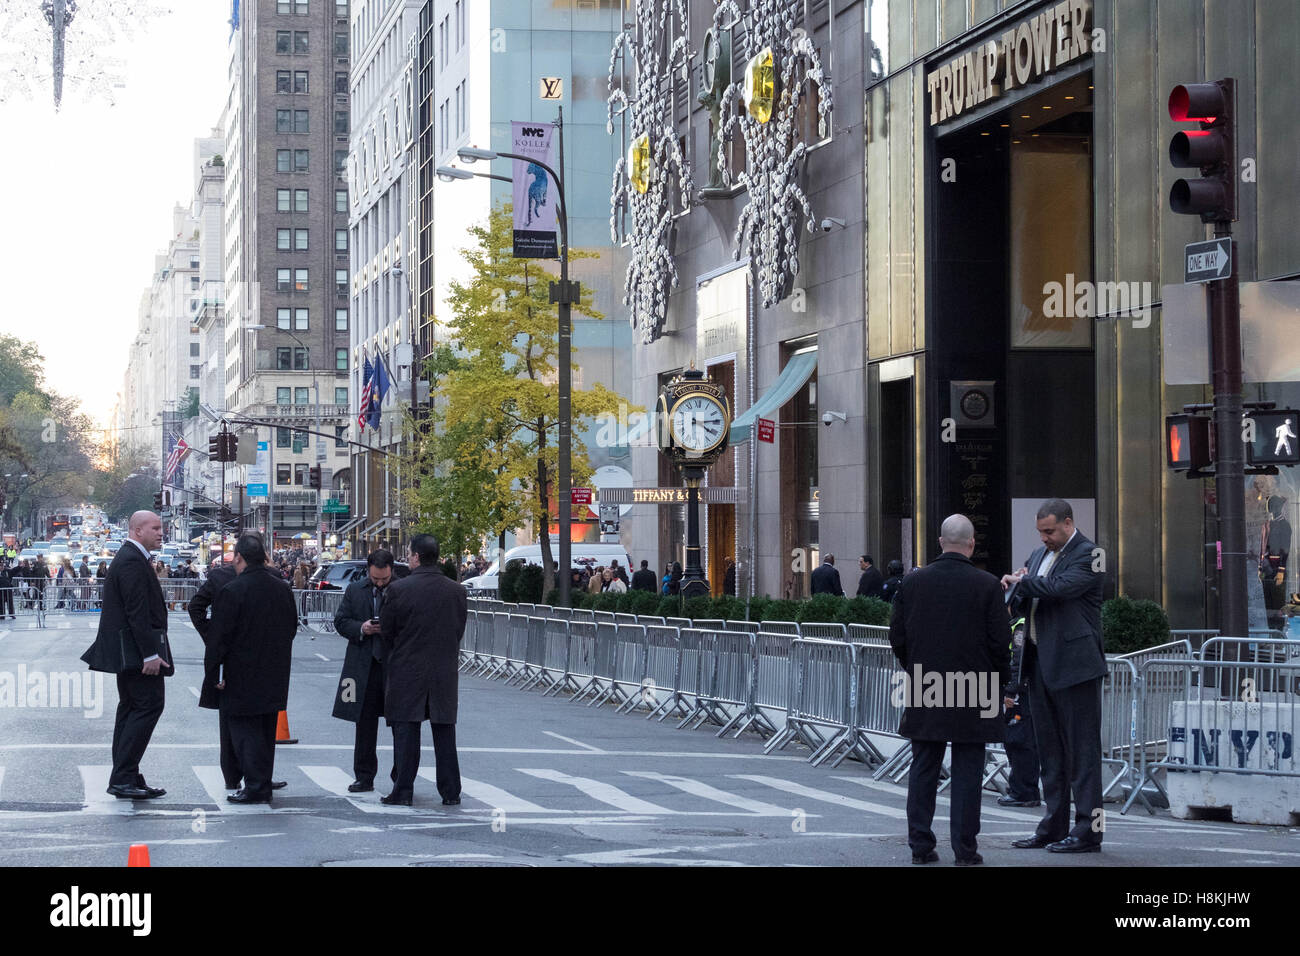 New York, USA. 13th November, 2016. NYC Police Commissioner New York, USA. 13th November, 2016. James P. O'Neill and other high-ranking NYPD officials convene a meeting on 5th Avenue, New York City, in front of the barricaded Trump Tower, as protestors march in the background. Credit:  barbara cameron pix/Alamy Live News Stock Photo